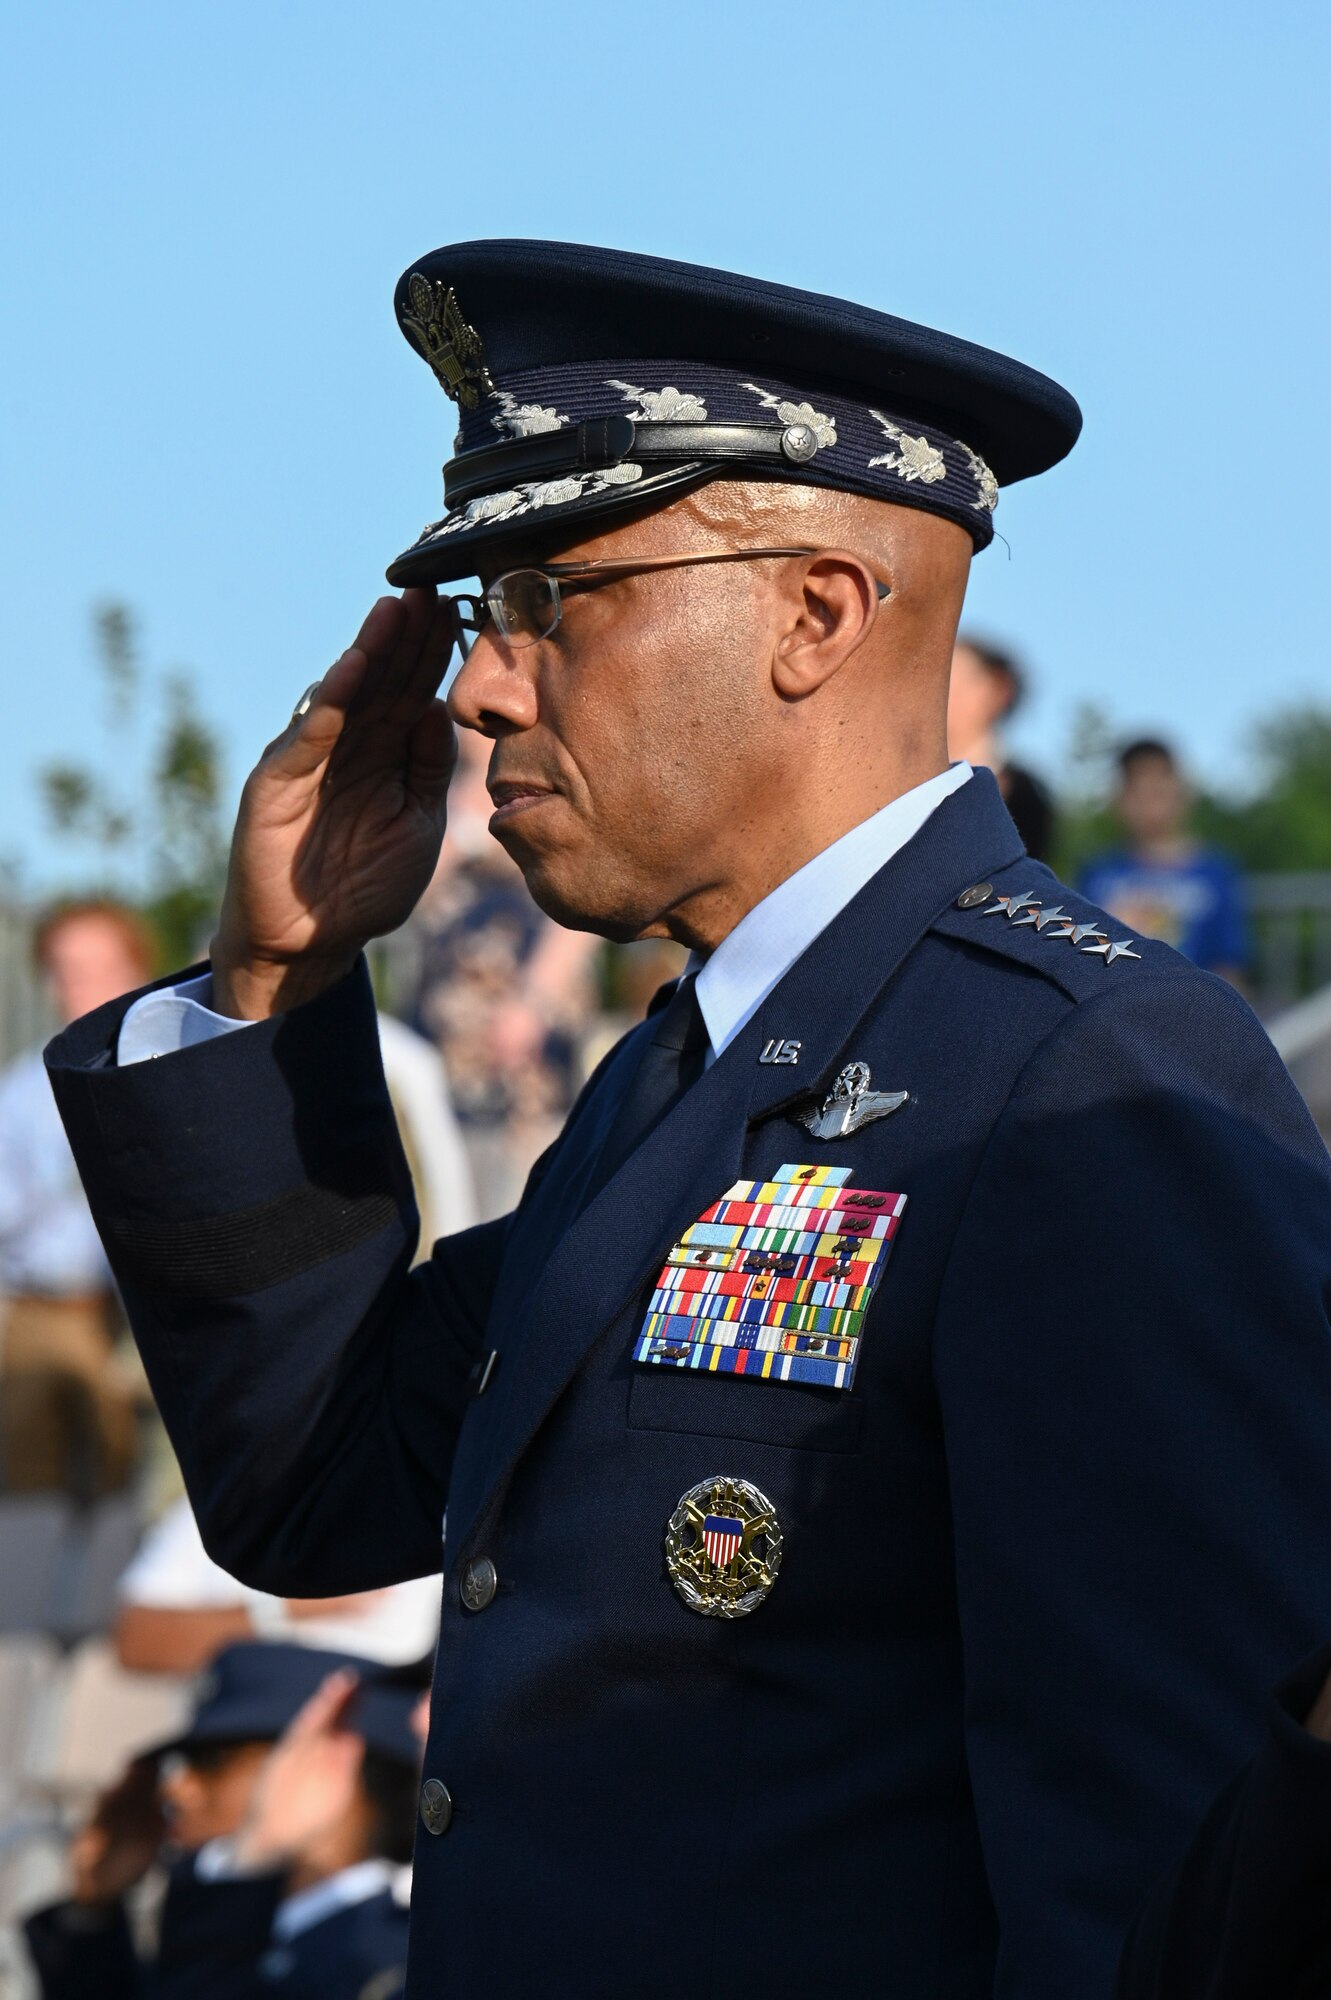 U.S. Air Force Chief of Staff Gen. CQ Brown, Jr., salutes during the national anthem performed by The United States Air Force Band during the U.S. Air Force’s 75th Birthday Celebration Spring Tattoo on the Air Force Ceremonial Lawn at Joint Base Anacostia-Bolling, Washington, D.C., May 3, 2022. Through world-class musical presentations and ceremonies, The U.S. Air Force Band helps create bonds between the United States and the worldwide community. Using music to bridge language, cultural, societal and socio-economic differences, the Band's performances advance international relationships and inspire positive and long-lasting impressions of the U.S. Air Force and the United States of America. (U.S. Air Force photo by Airman Bill Guilliam)